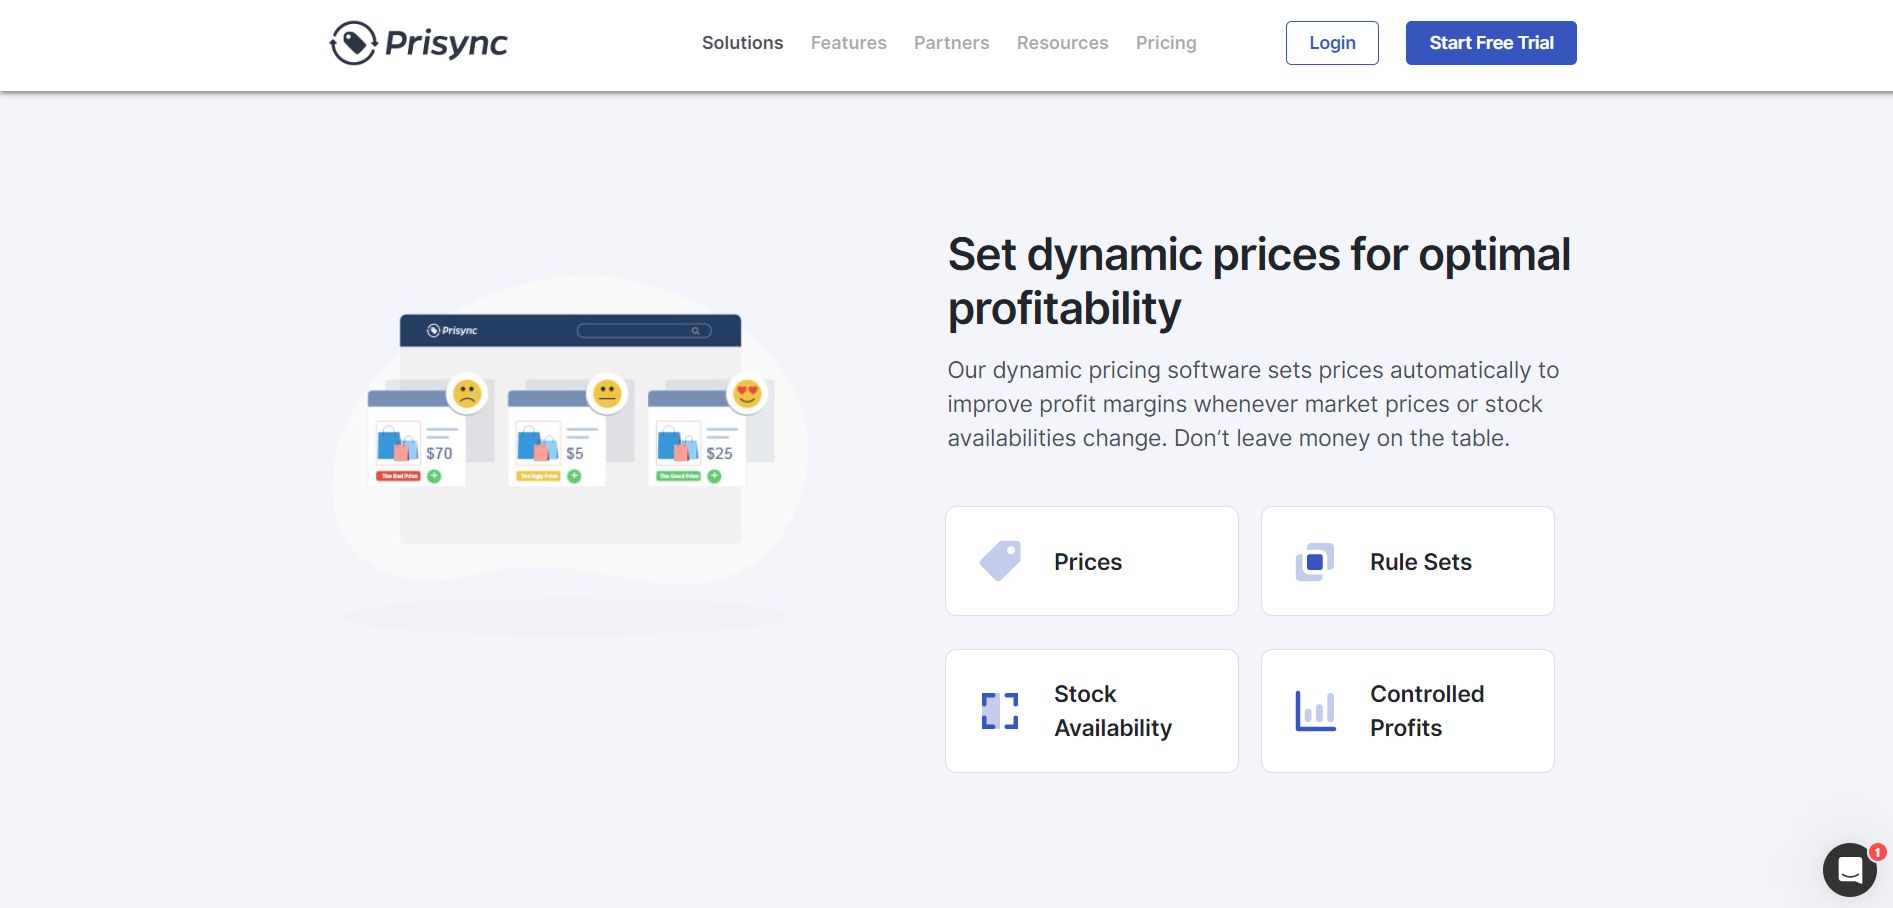 Prisync’s product page for dynamic pricing solution